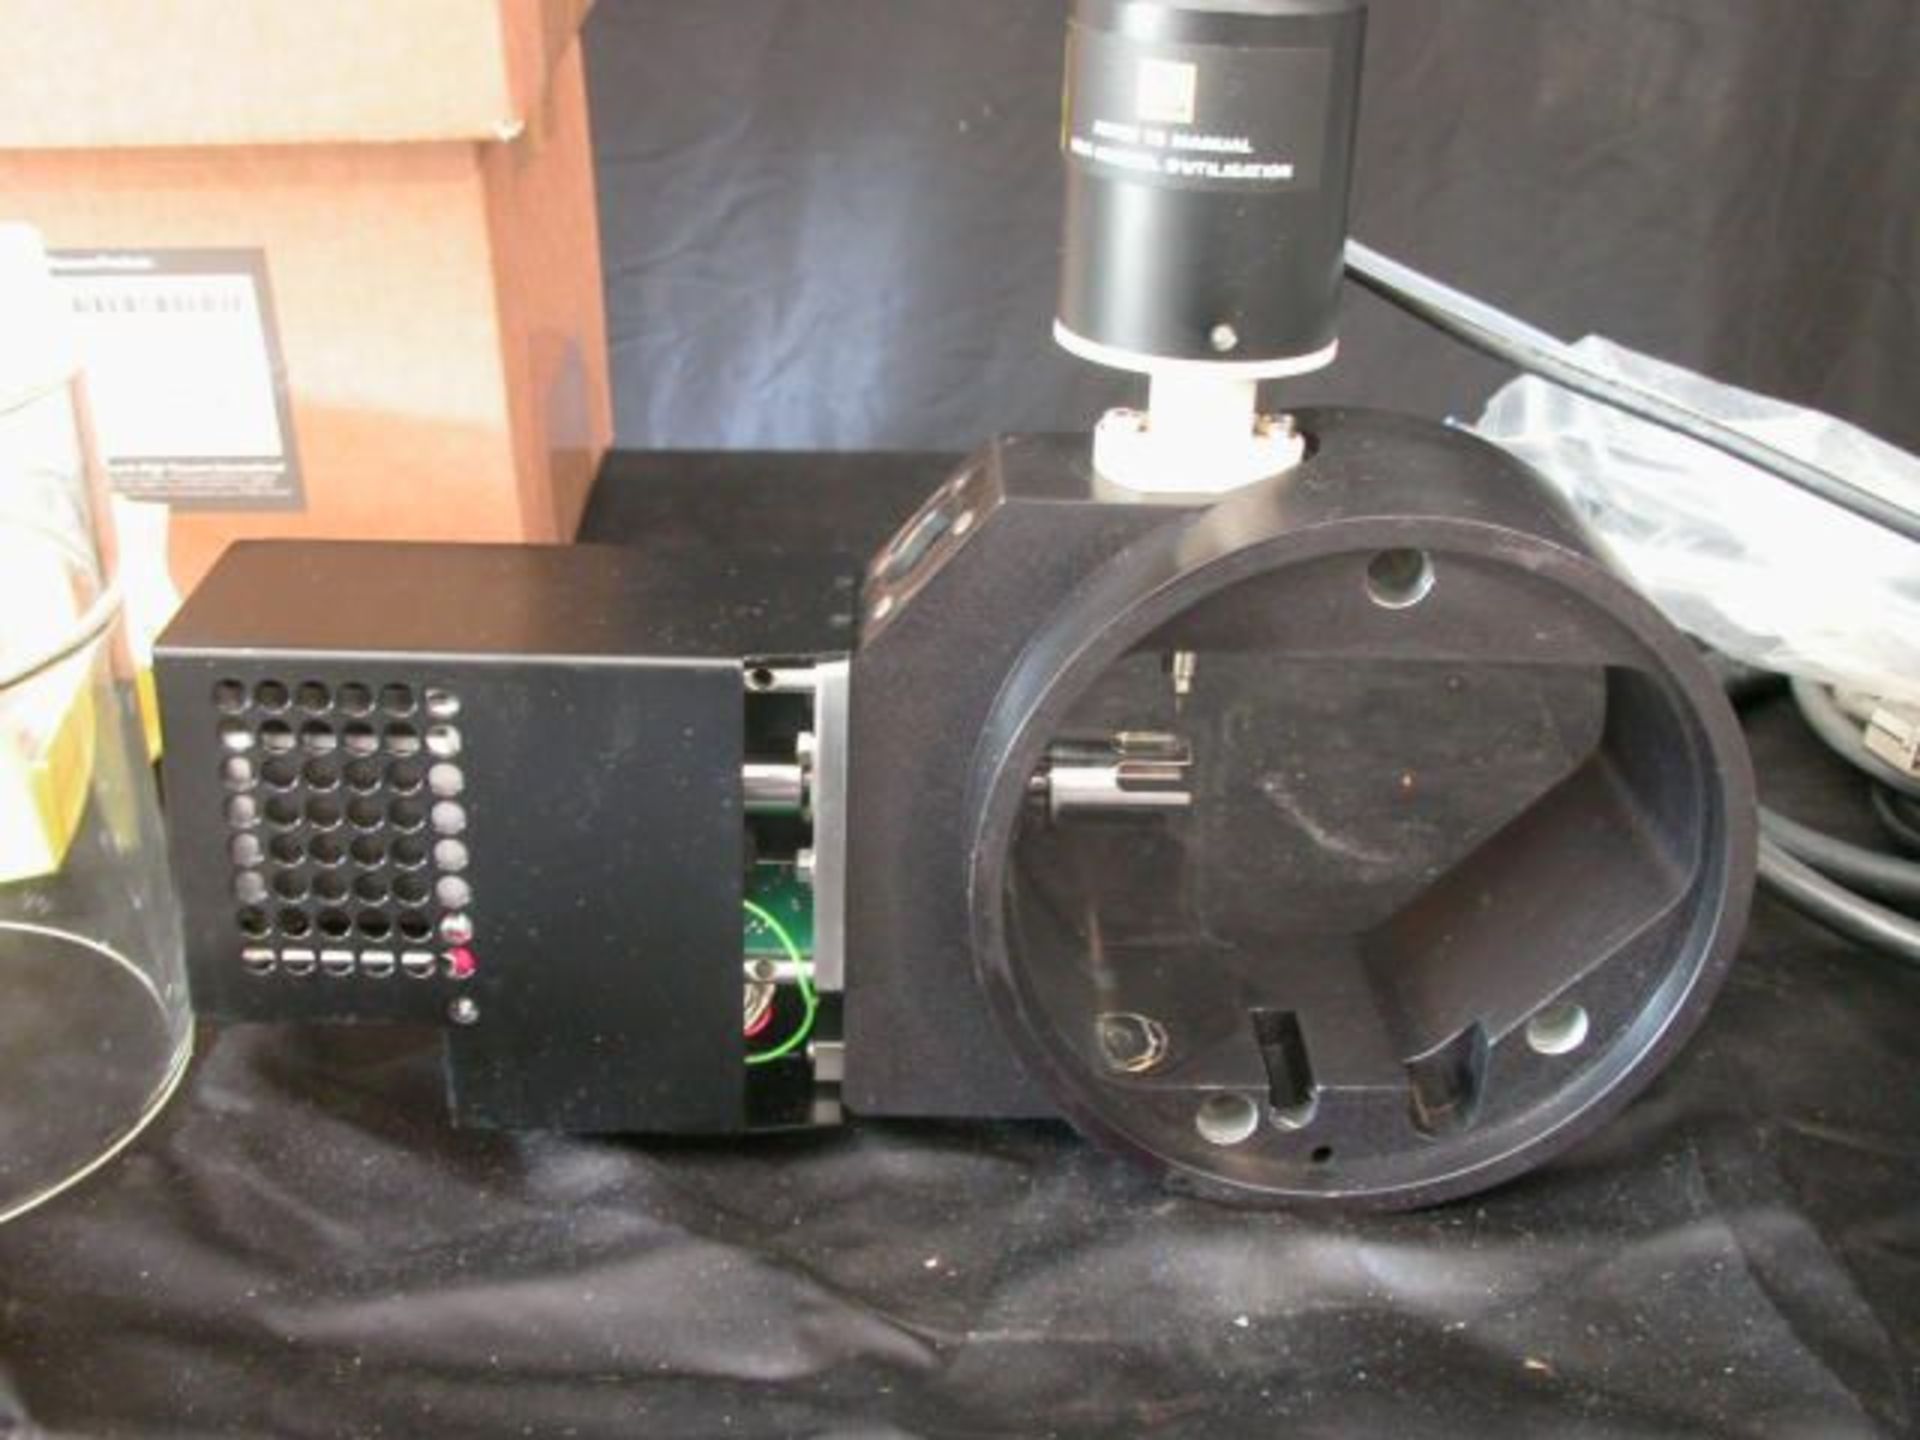 Waters/Micromass Q-Tof Ultima Mass Spectrometer P.M. KIT W/ Extras, Qty 1, 321118842113 - Image 8 of 13